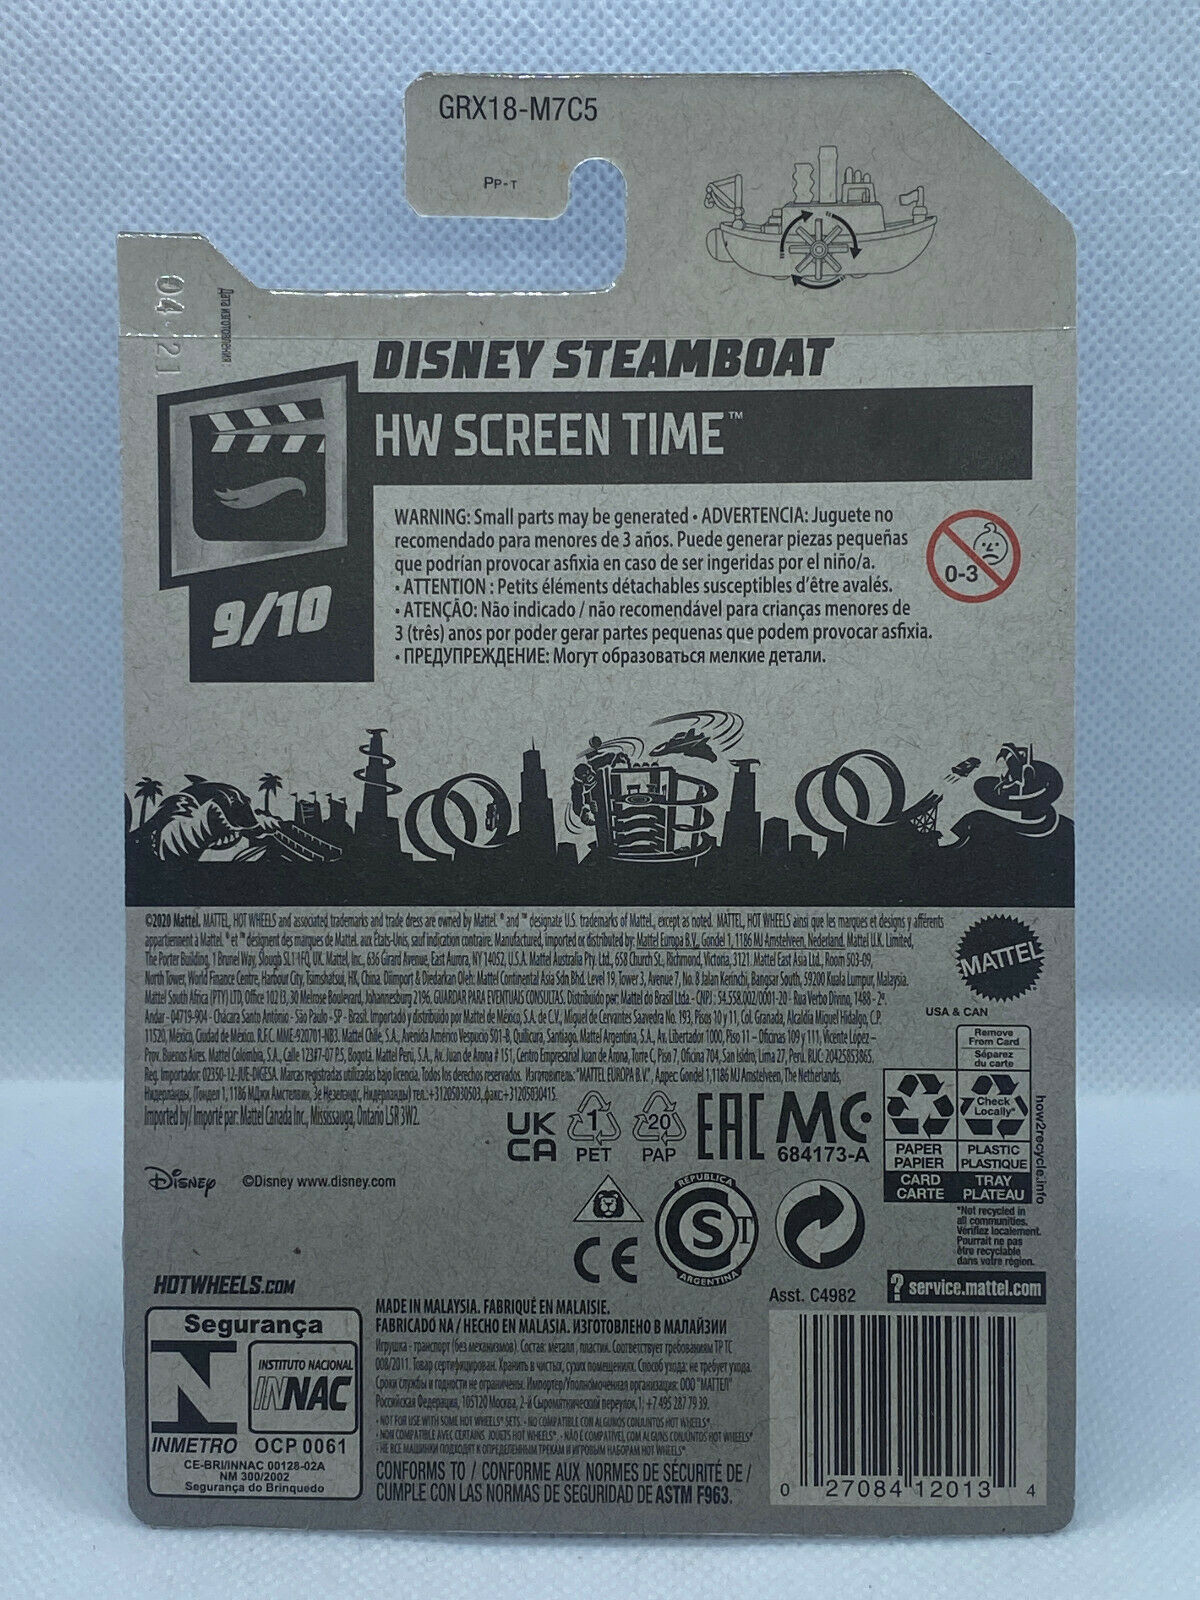 2021 Hot Wheels HW Screen Time 9/10 Mickey Mouse Disney Steamboat